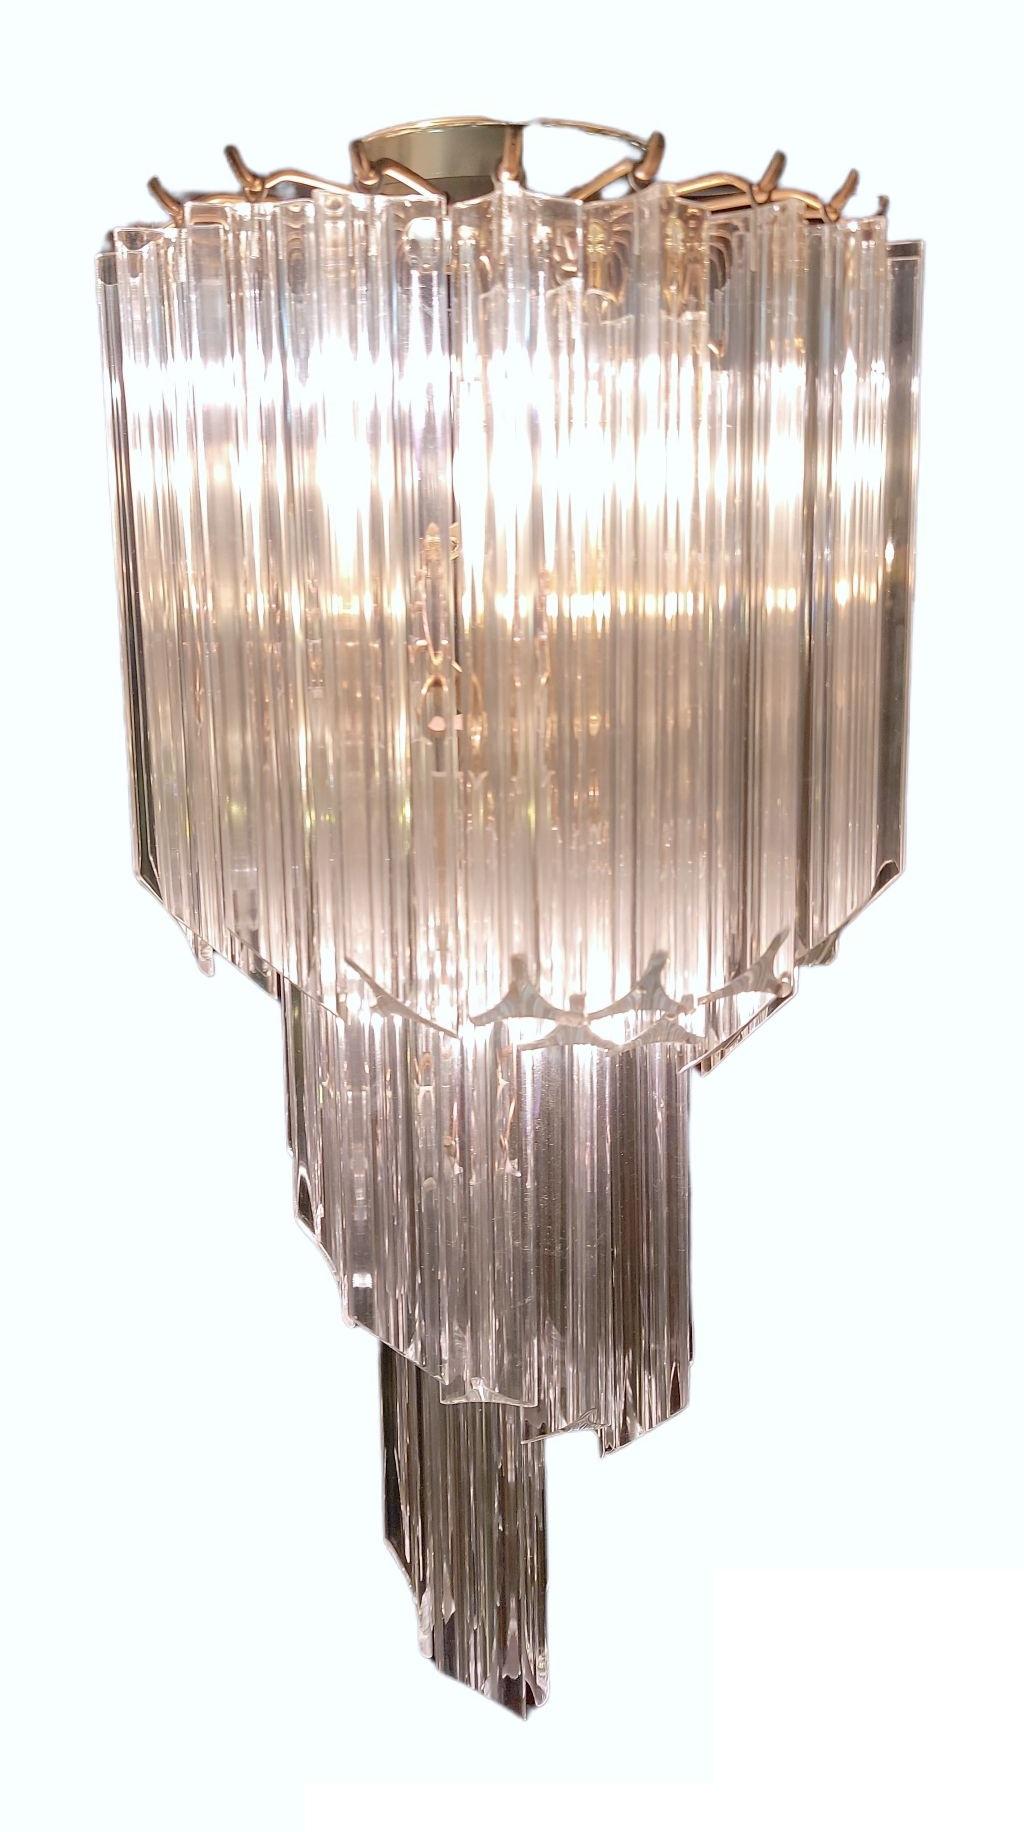 Adirondack 1970s Mid-Century Modern Lucite Swirl Waterfall Design Chandeliers, a Pair For Sale